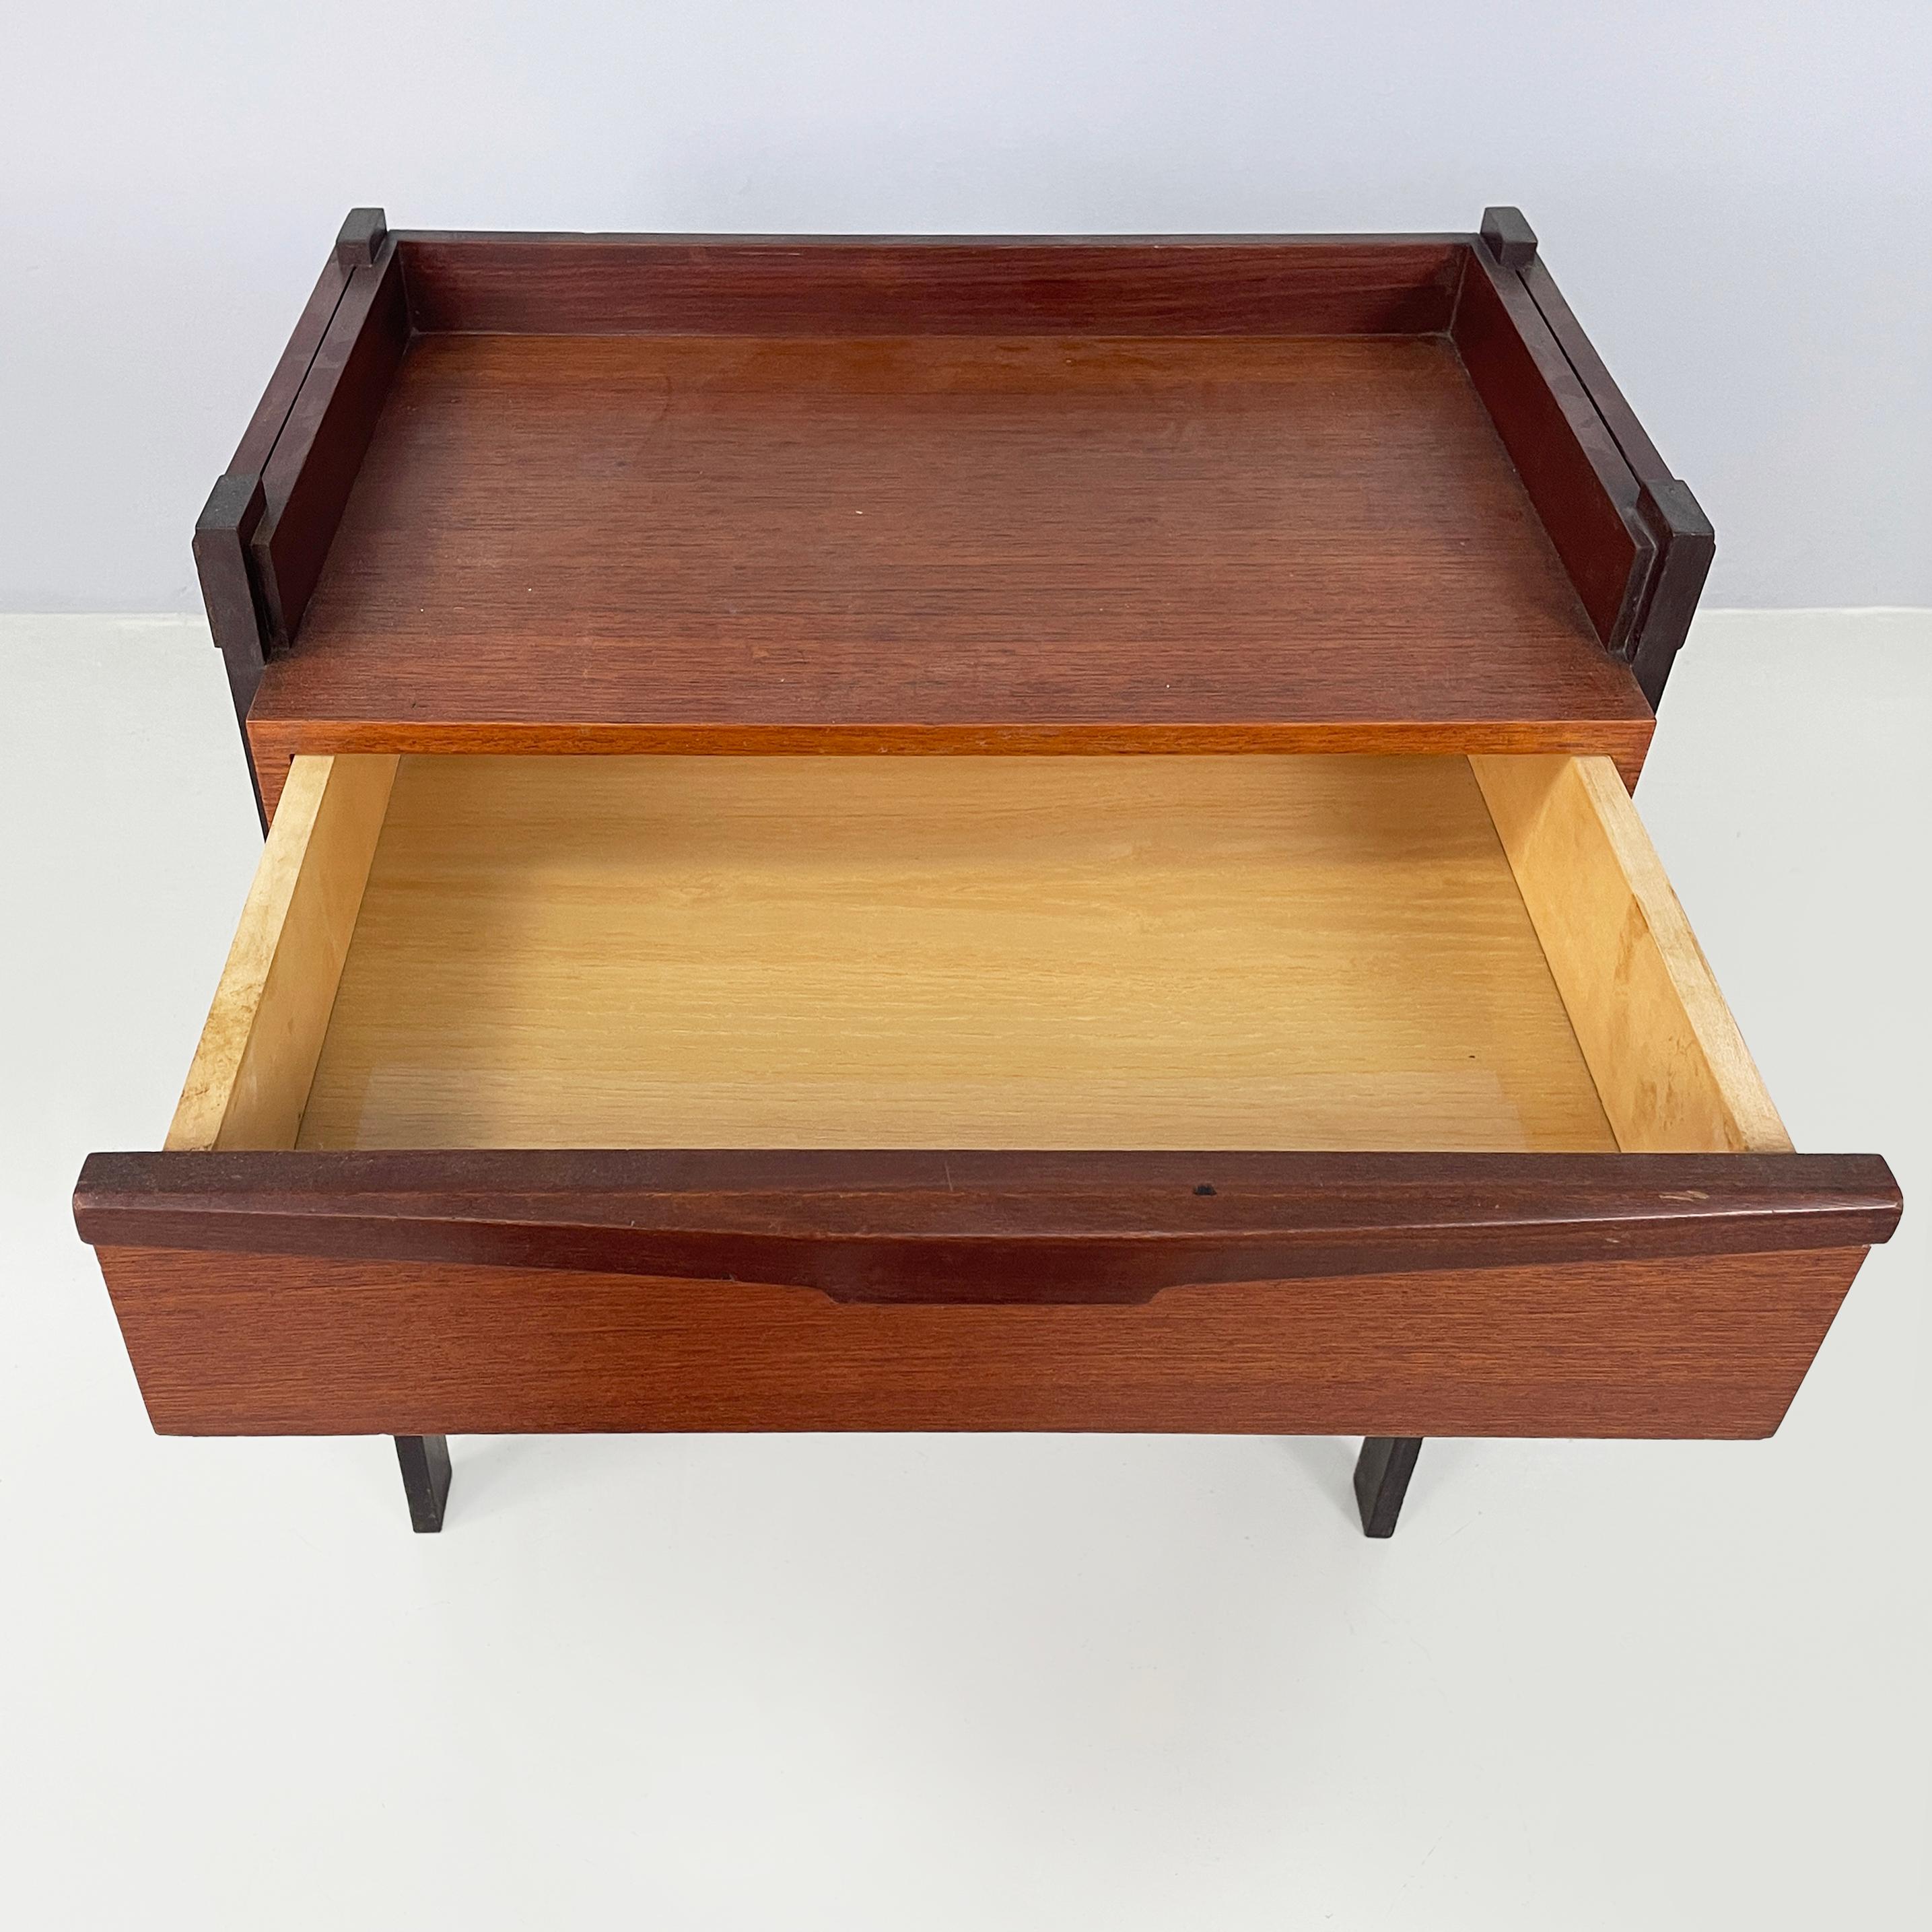 Italian mid-century modern Wooden coffee table with shelves and drawer, 1960s For Sale 3